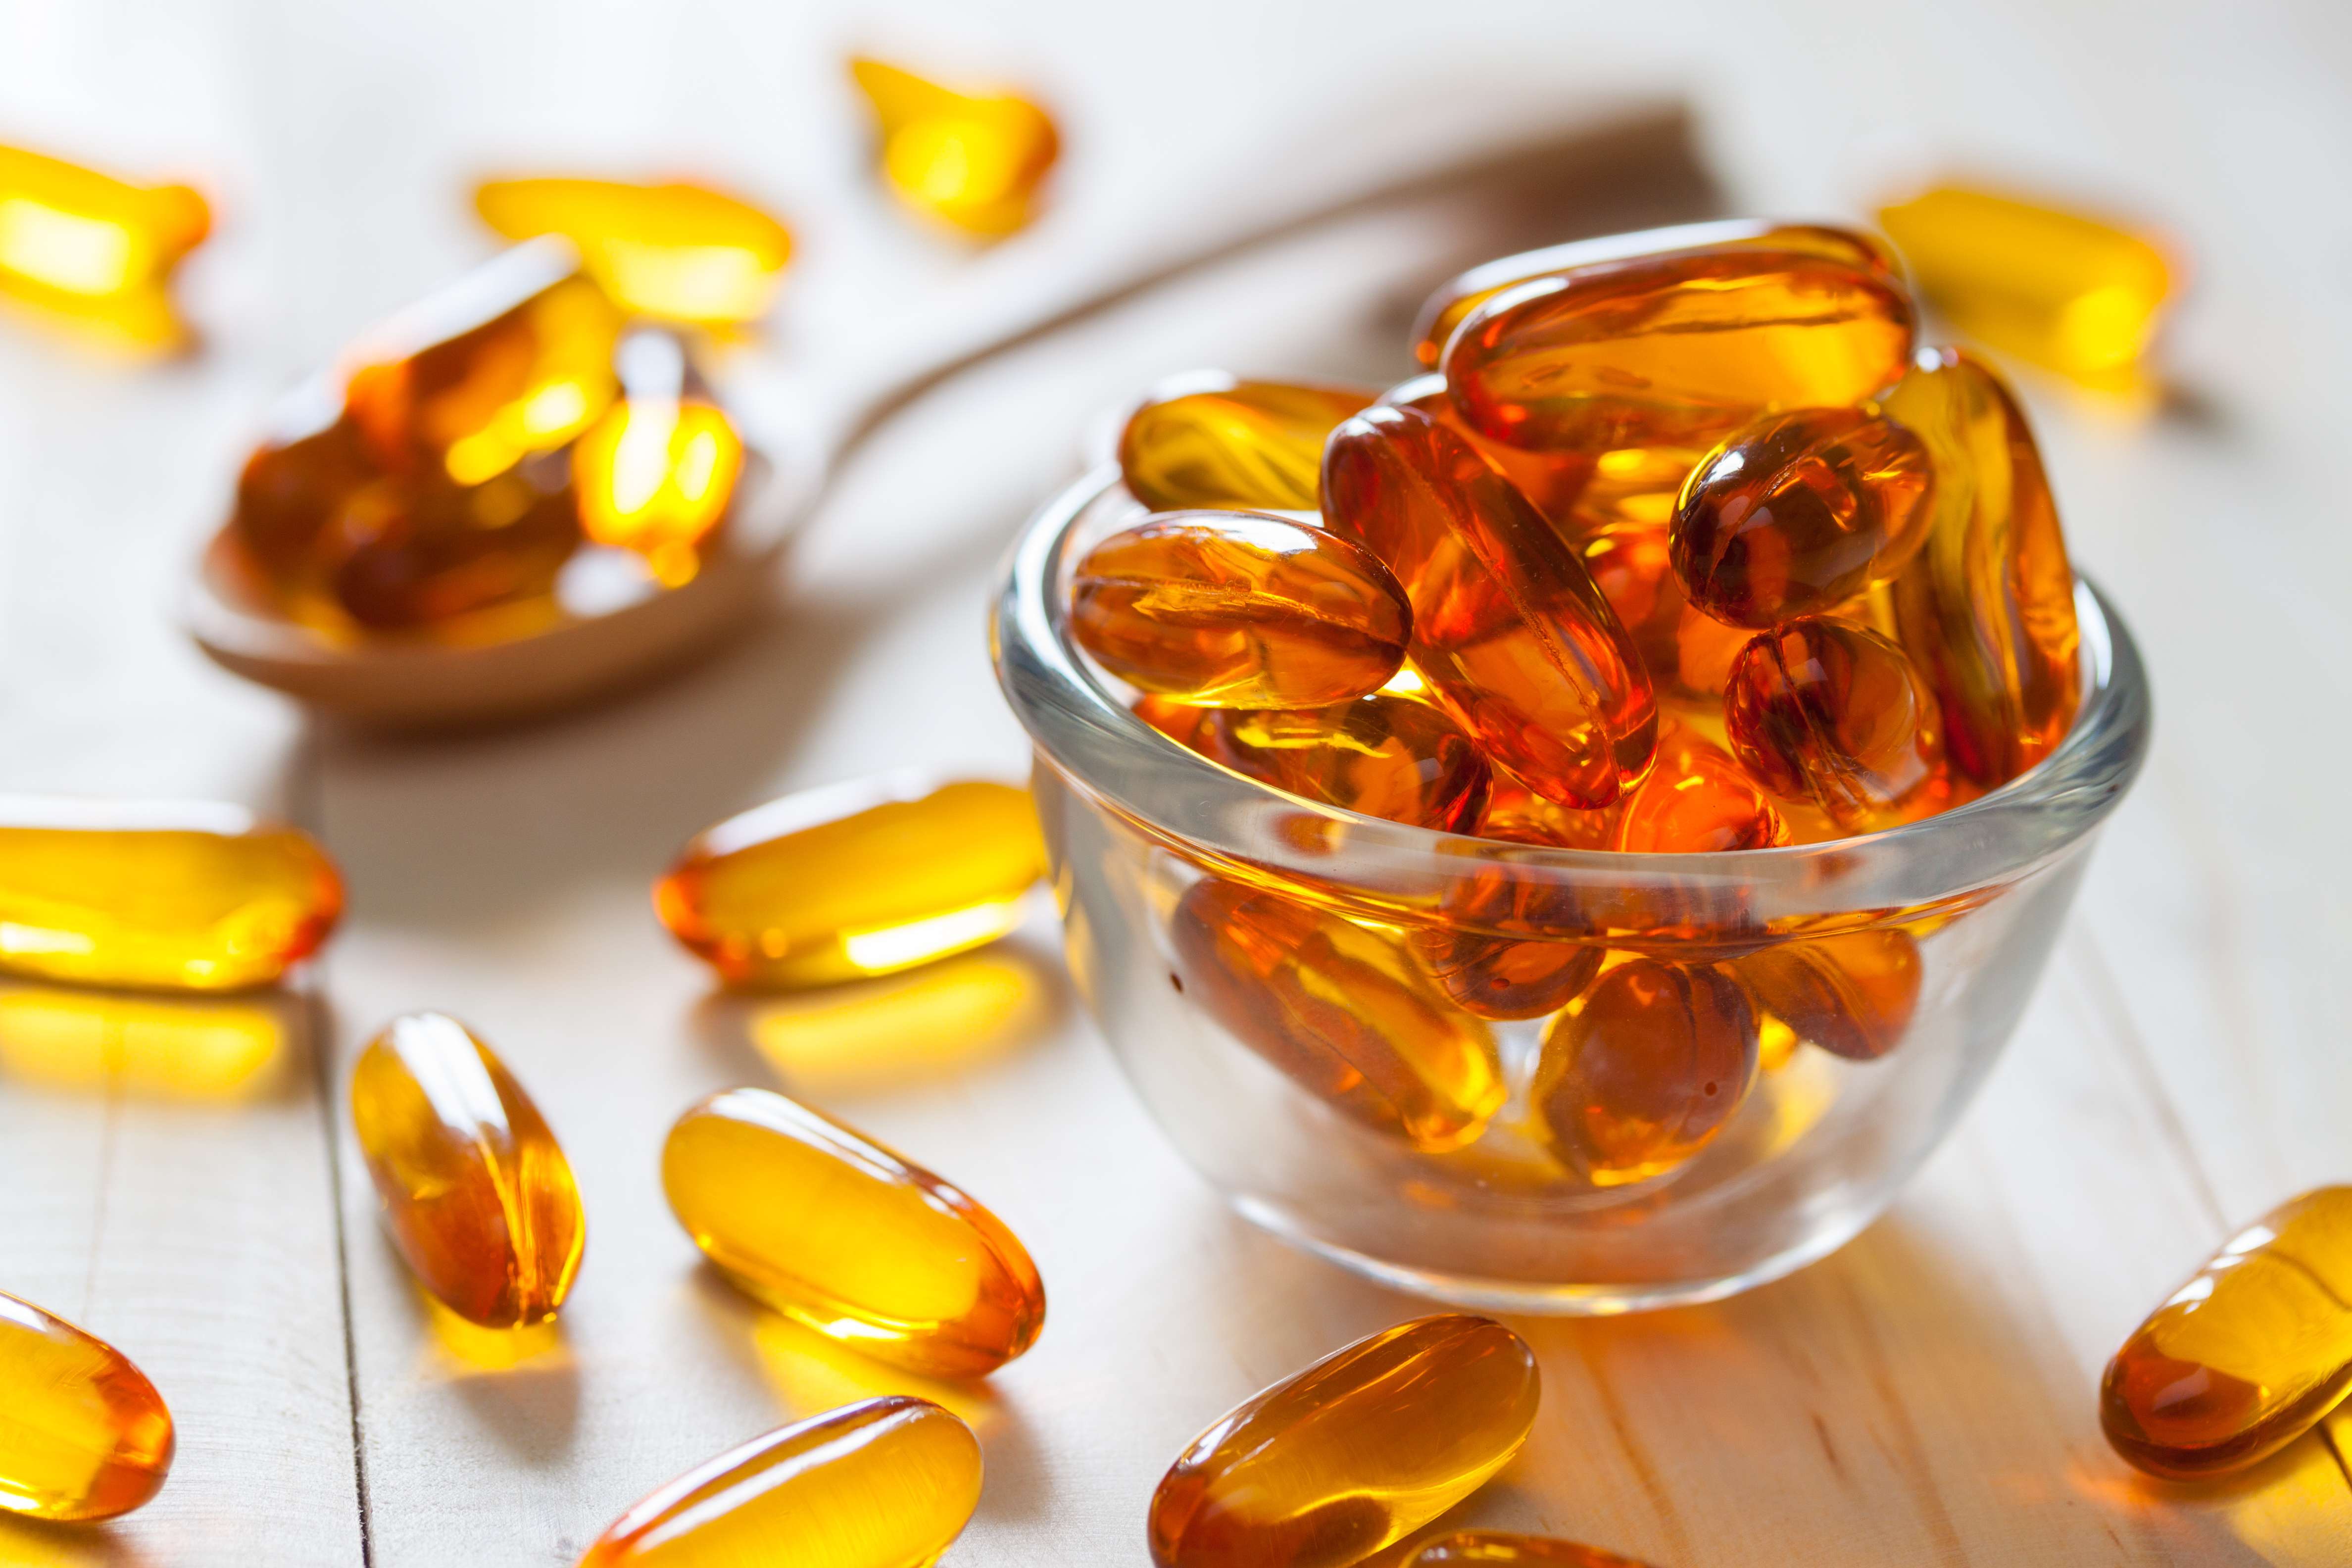 Fish oil capsules are a good vitamin D supplement.